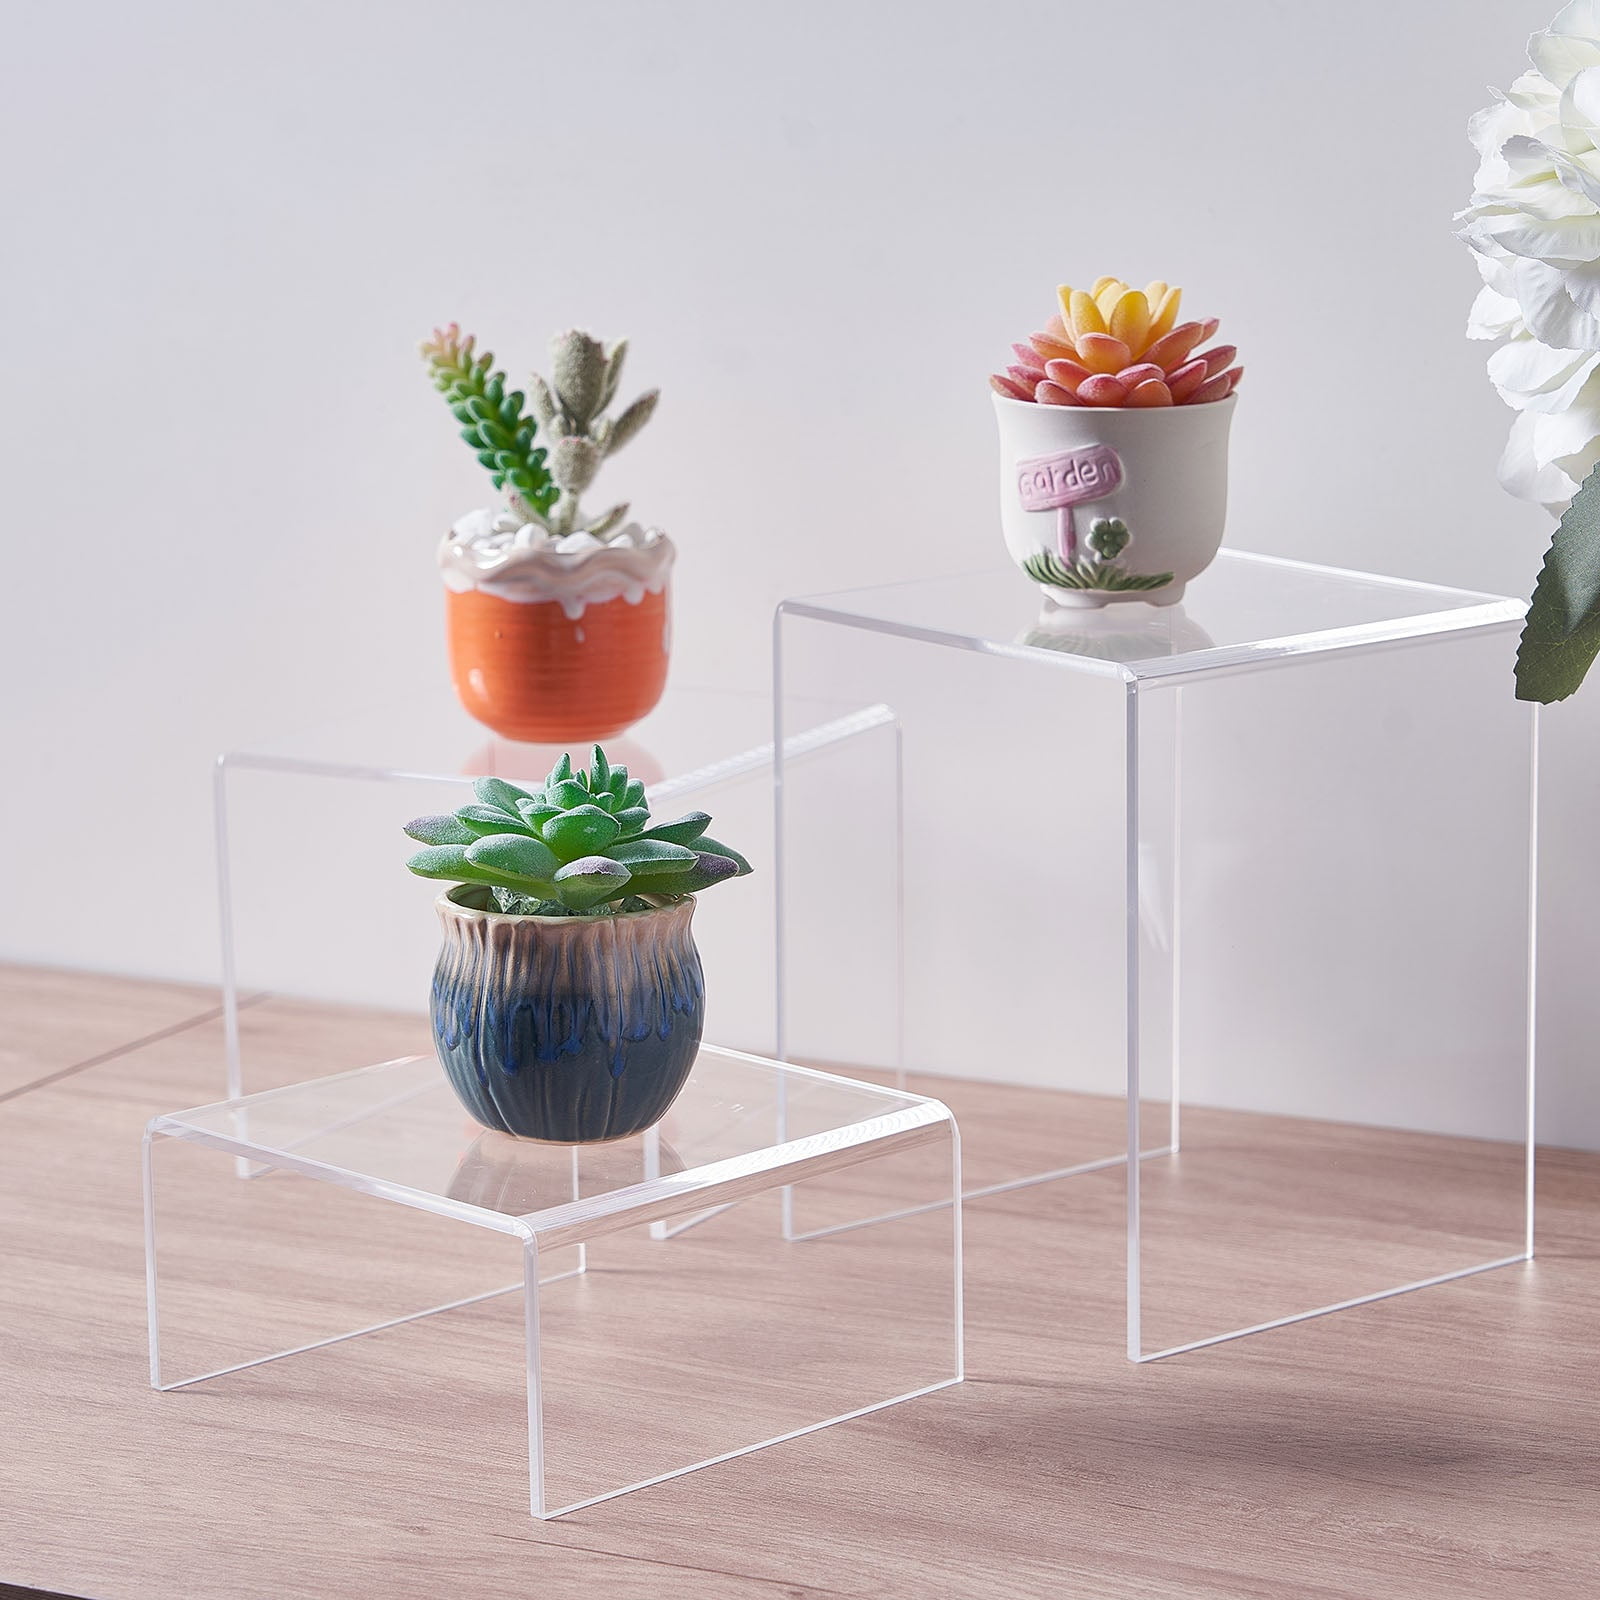 Ouskr Acrylic Risers for Display, 10 Pcs Acrylic Display Riser, Clear Display Stands for Shelf Dessert Cupcake Candy Food Tabletop Collectibles